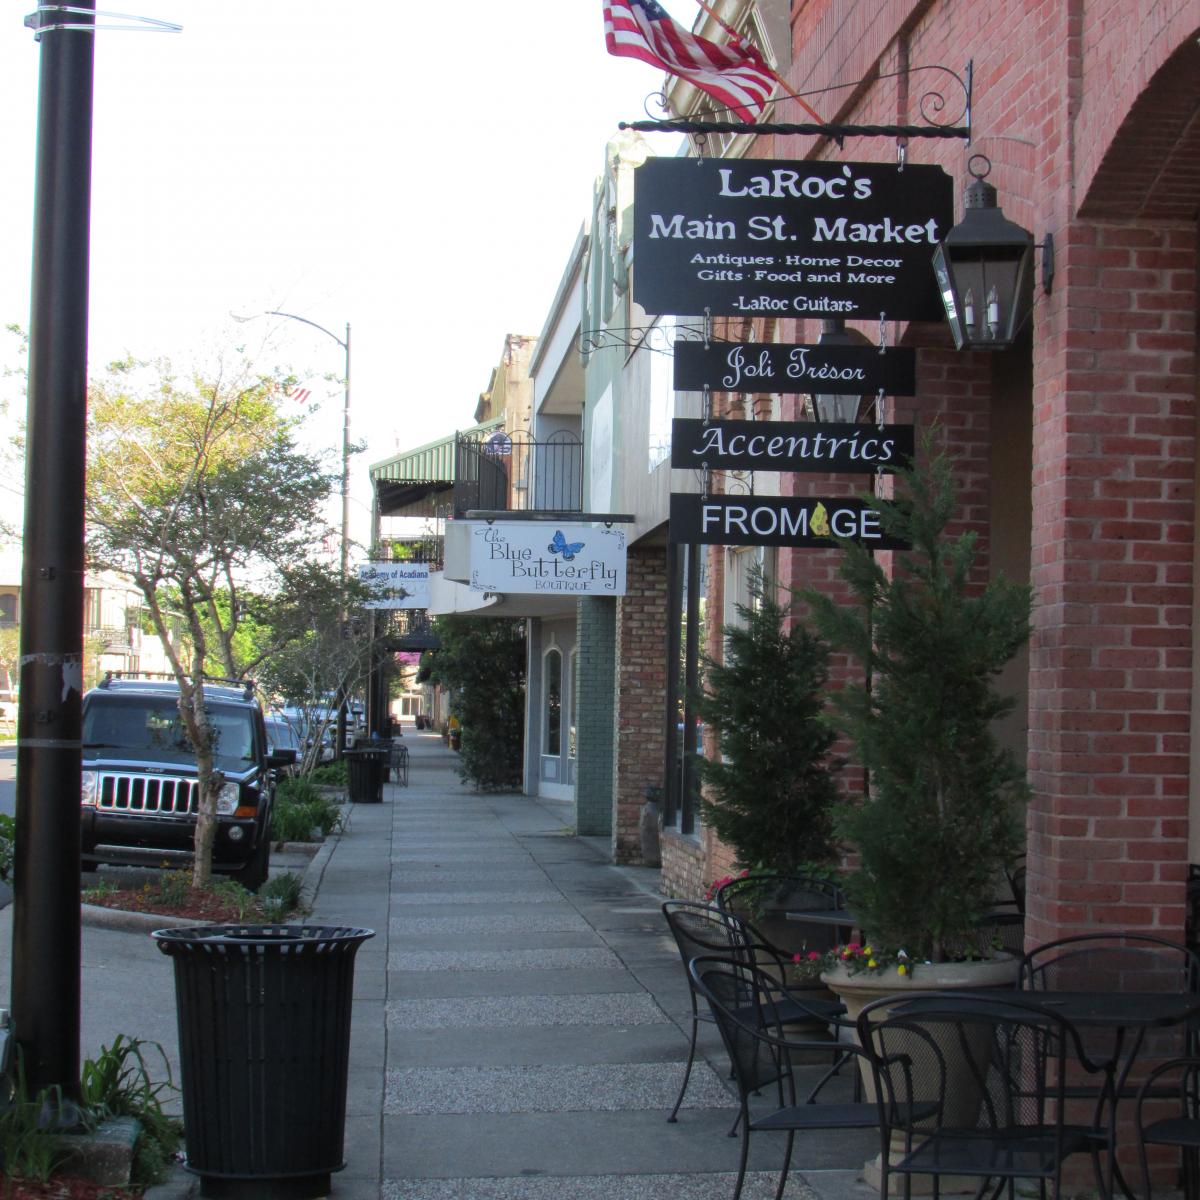 LaRoc's Main St. Antique Market and Fromage on Main Street New Iberia